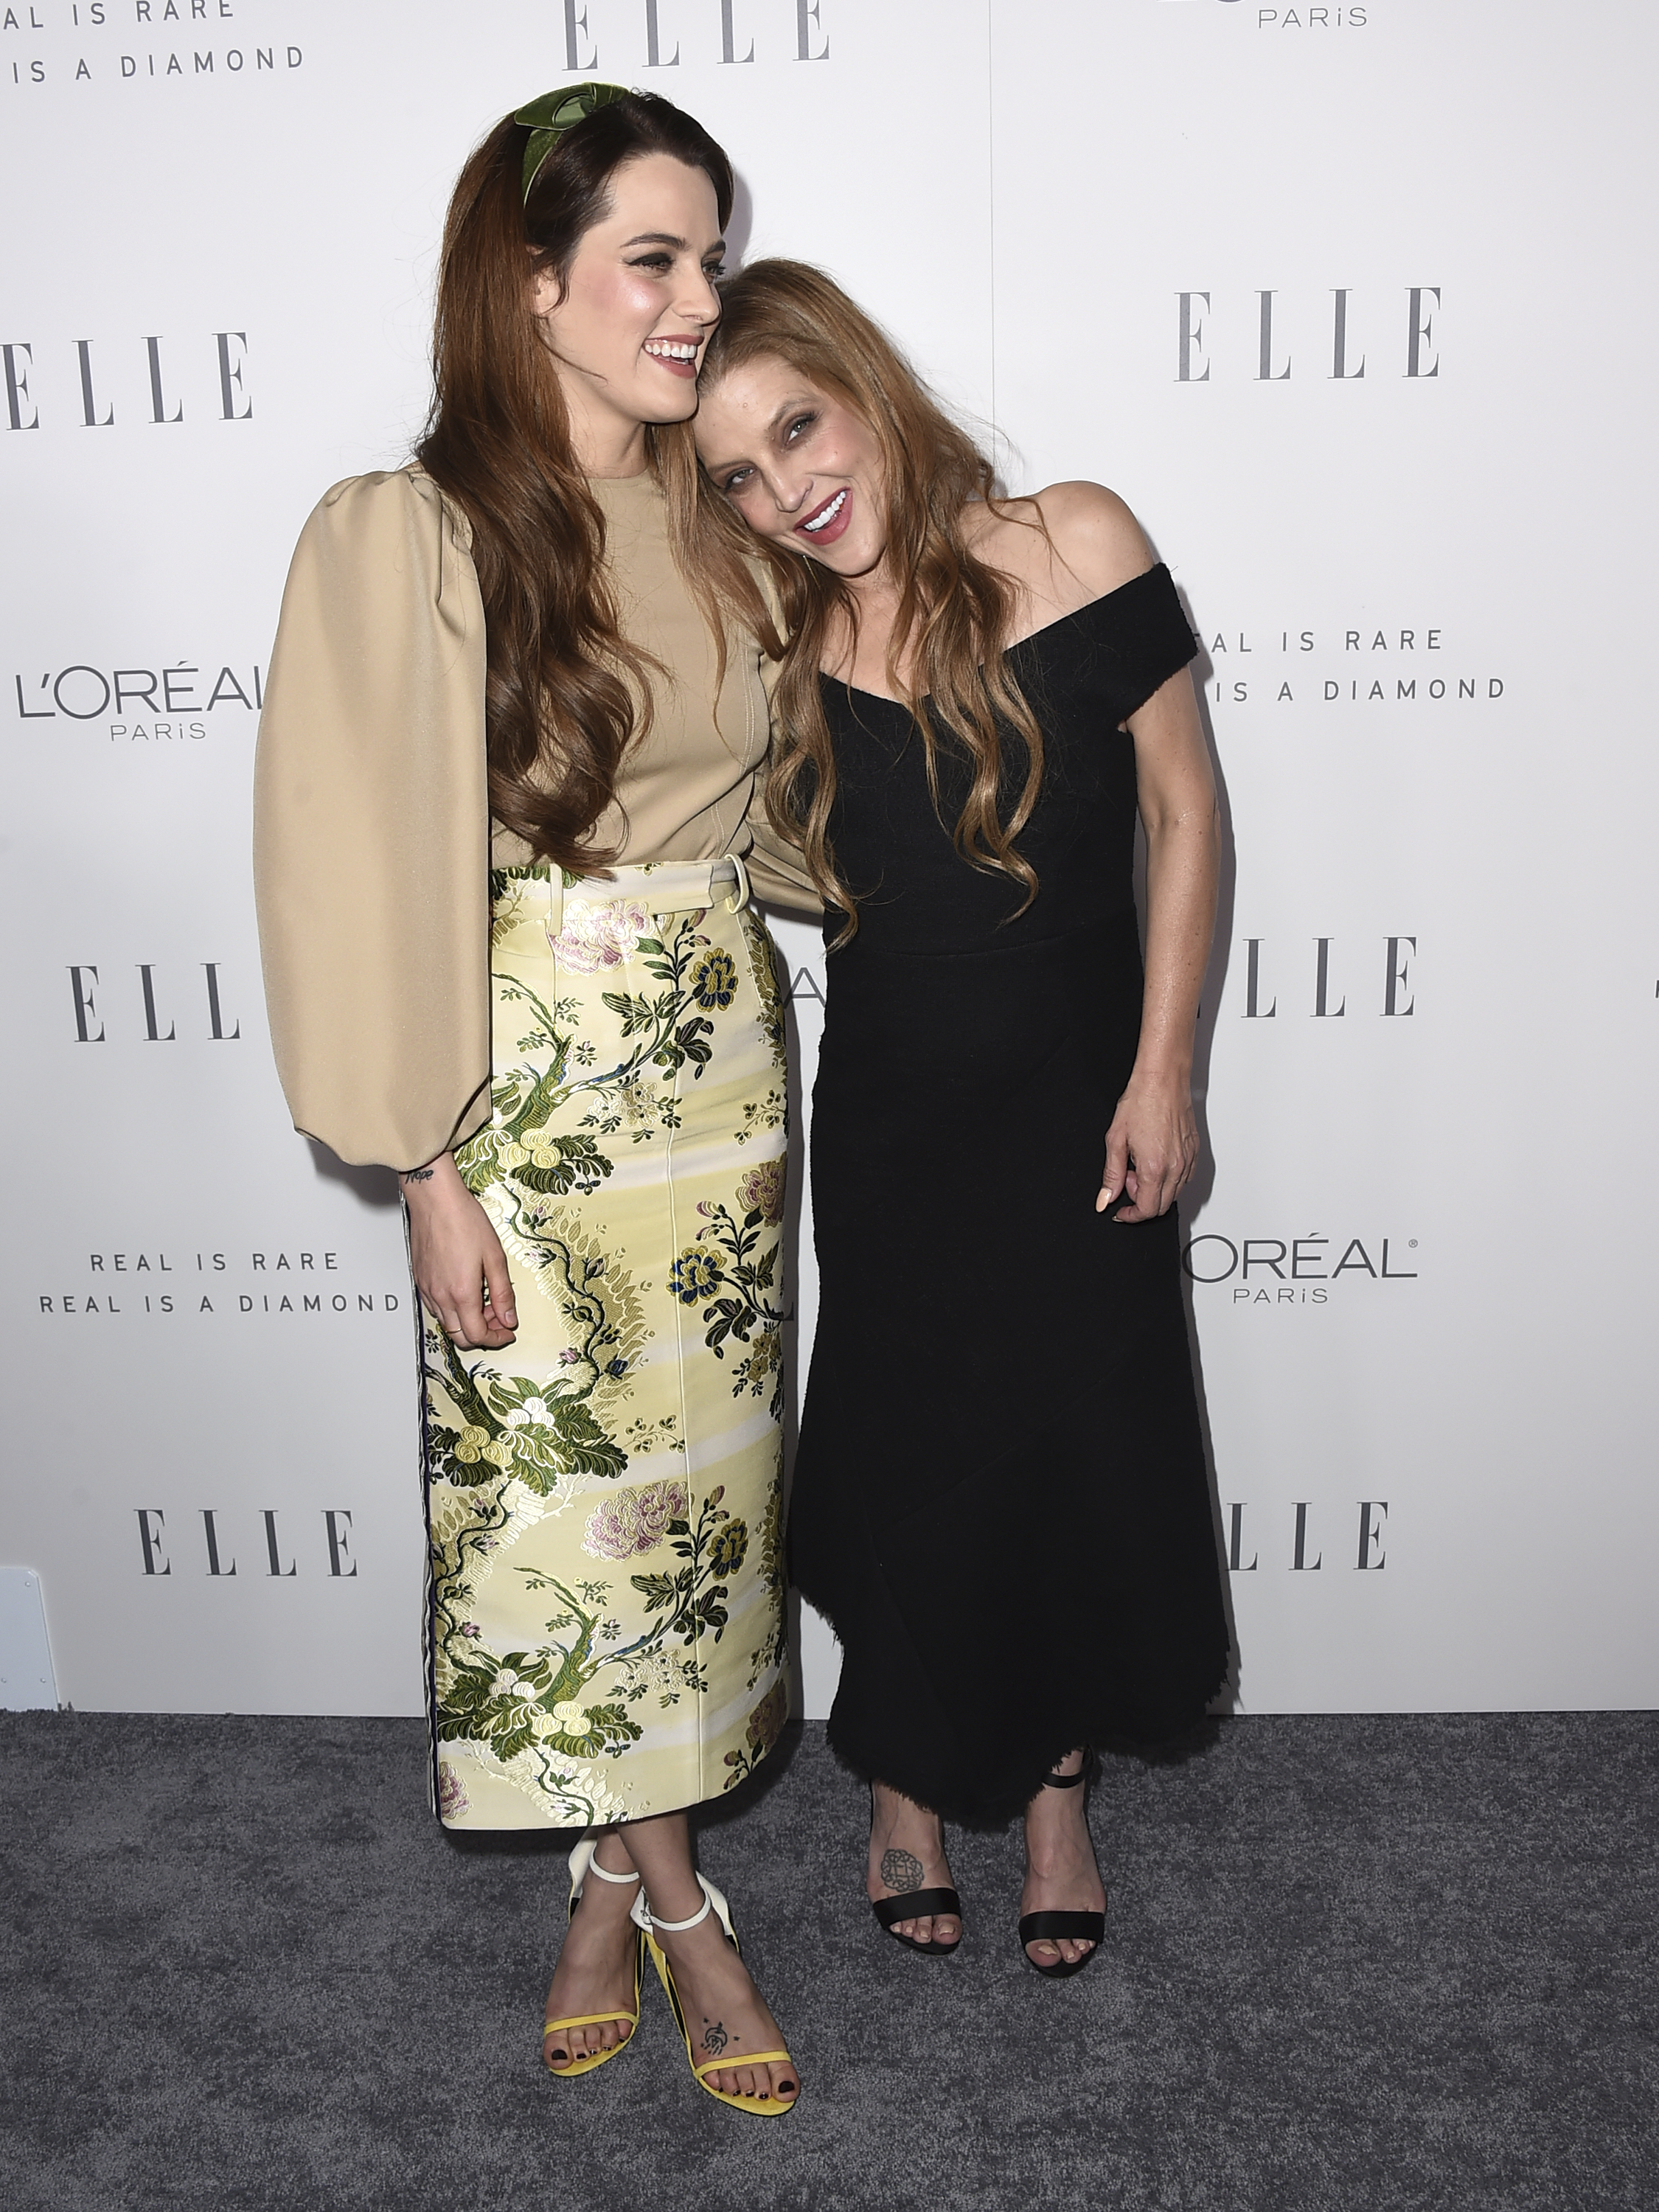 FILE – Riley Keough, left, and her mother Lisa Marie Presley arrive at the 24th Annual ELLE Women Awards in Hollywood on October 16, 2017 in Los Angeles.  Presley, singer-songwriter, Elvis's only descendant and dedicated guardian of her father's legacy, died on January 12, 2023, after being hospitalized, her mother Priscilla Presley said.  She was 54 years old.  (Photo Jordan Strauss/Invision/AP, File)